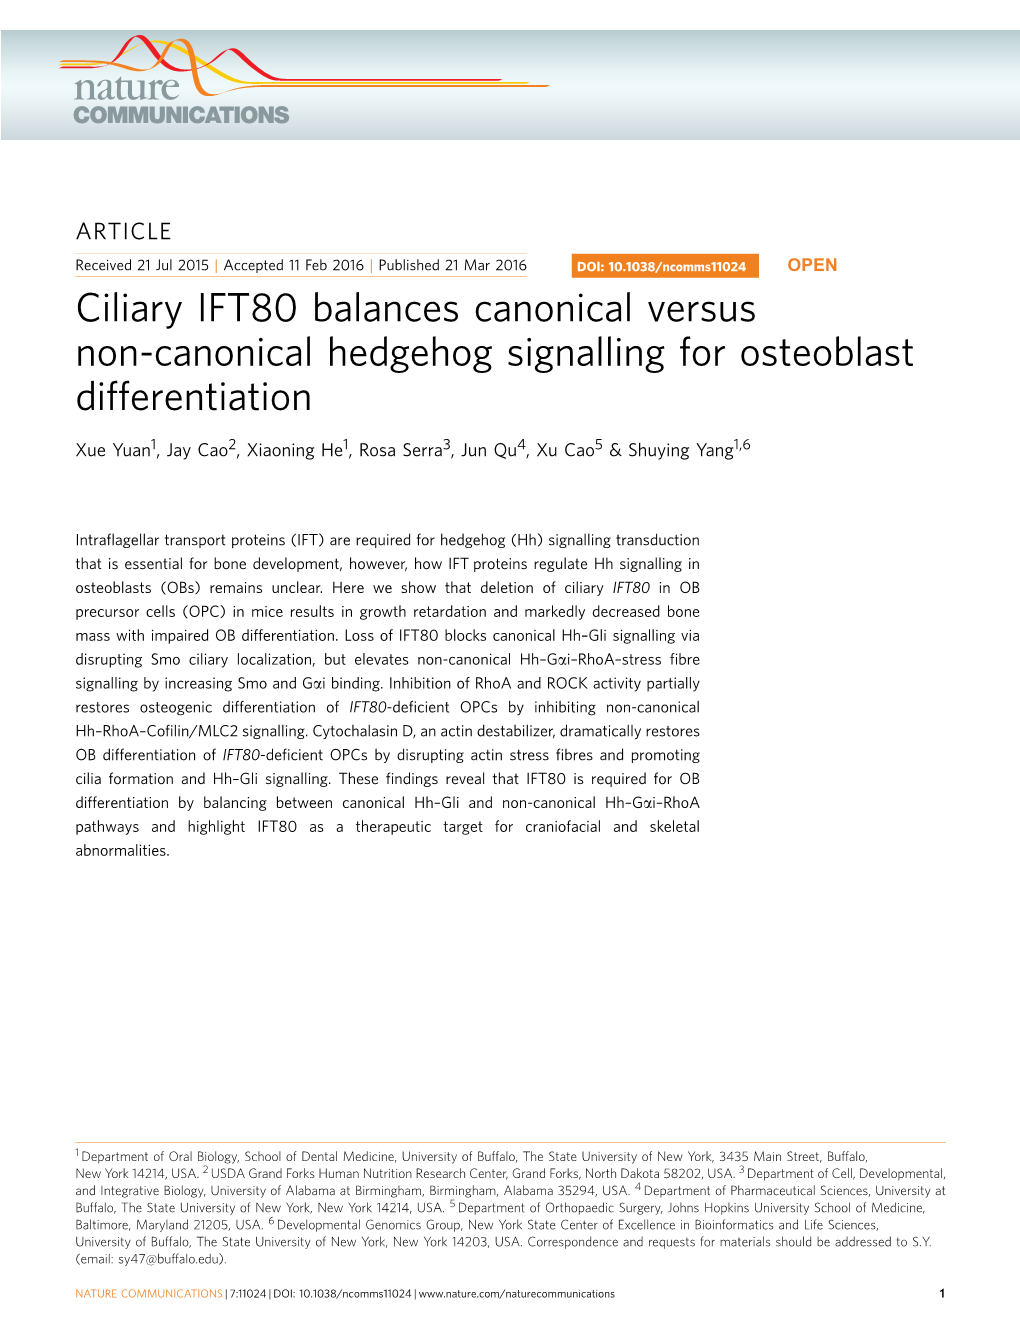 Ciliary IFT80 Balances Canonical Versus Non-Canonical Hedgehog Signalling for Osteoblast Differentiation